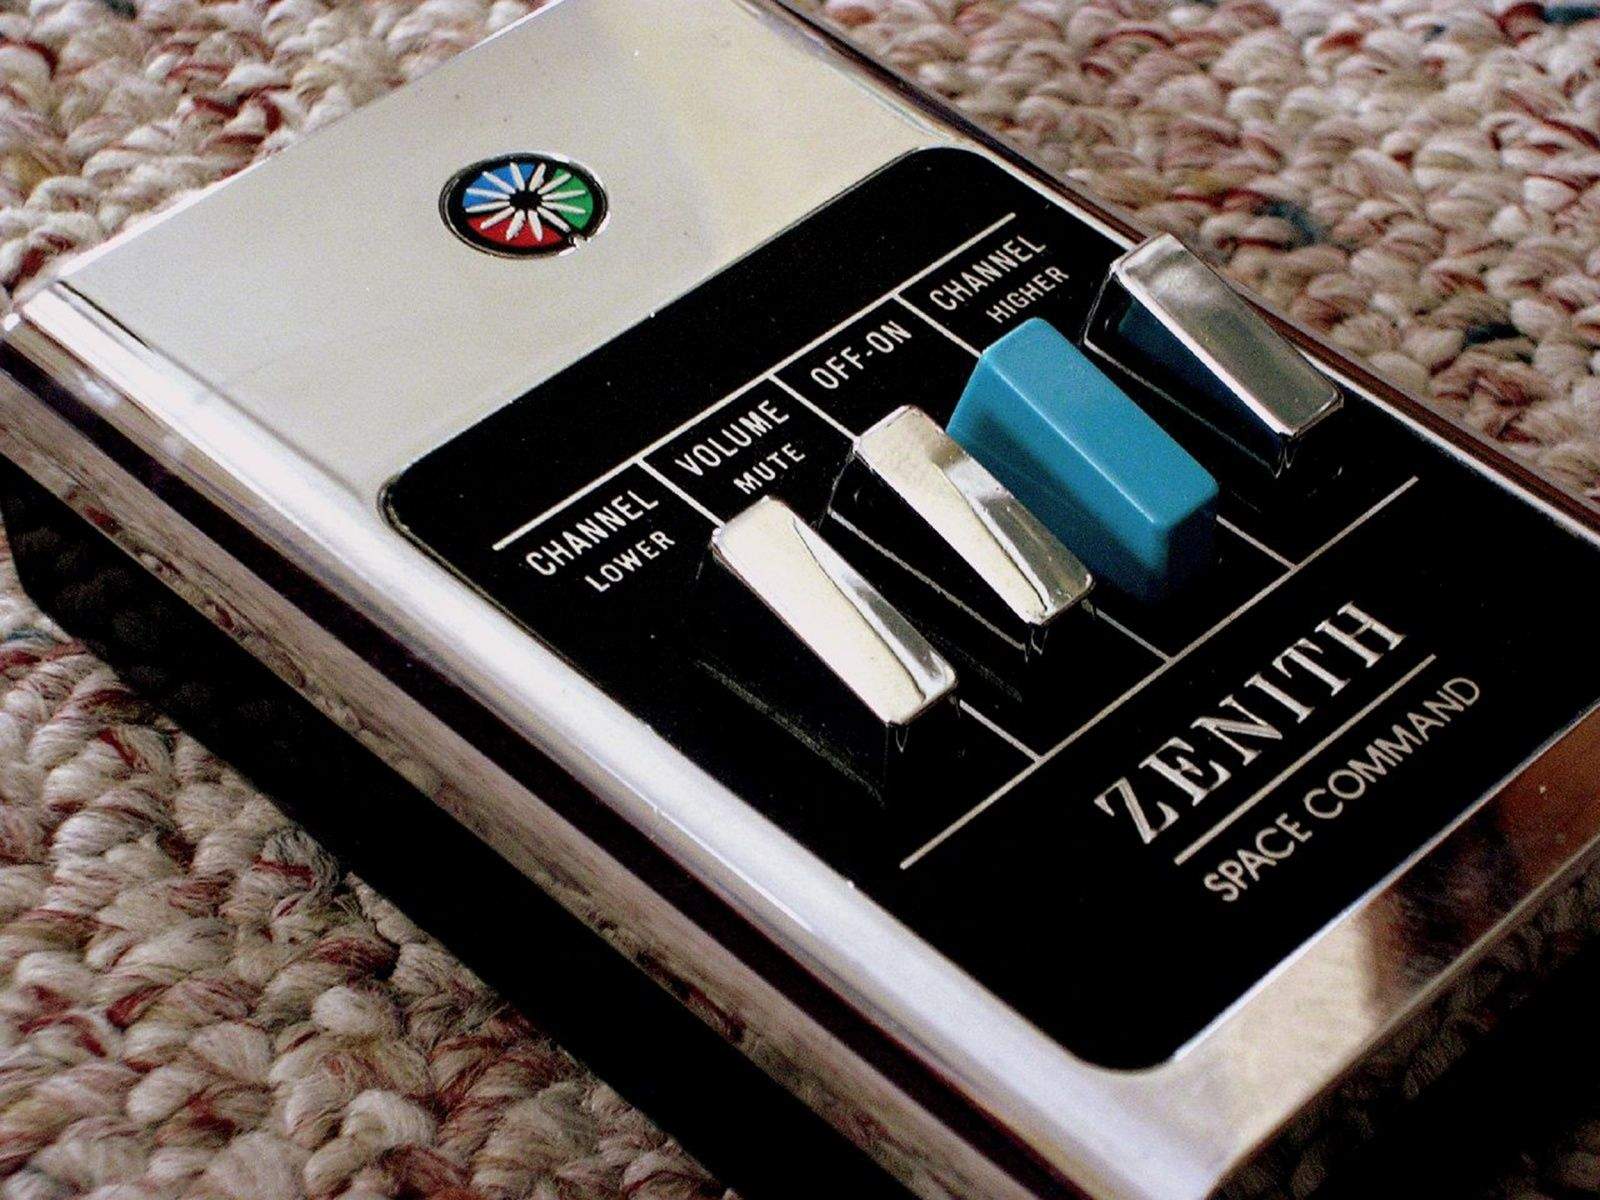 The remote control for the Zenith Space Command TV. Photo: Todd Ehlers/Flickr CC